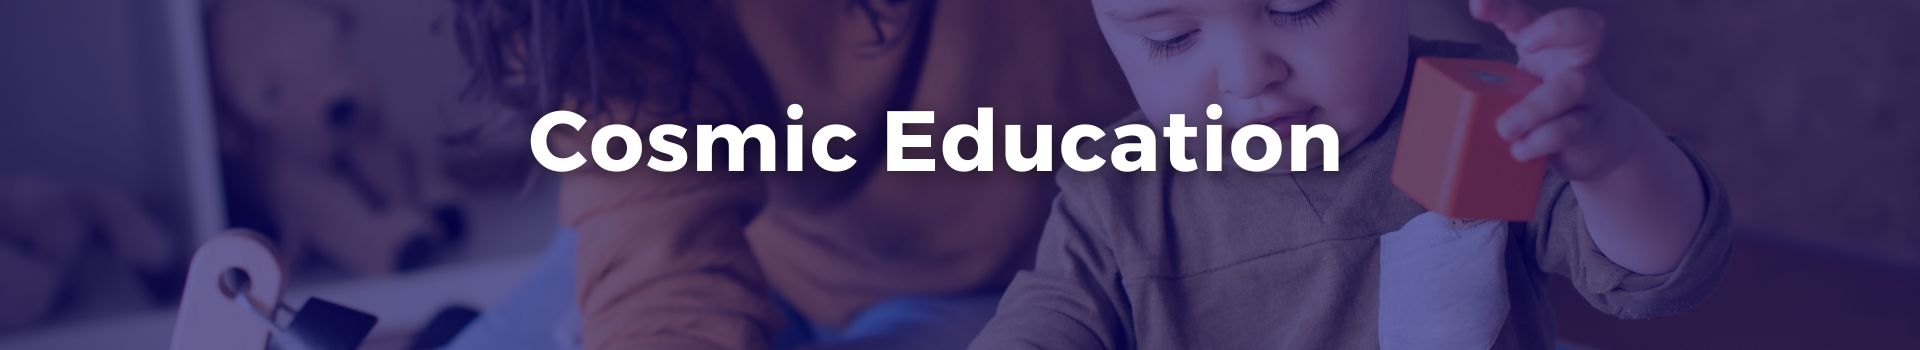 cosmic-education-heather-white-one-banner